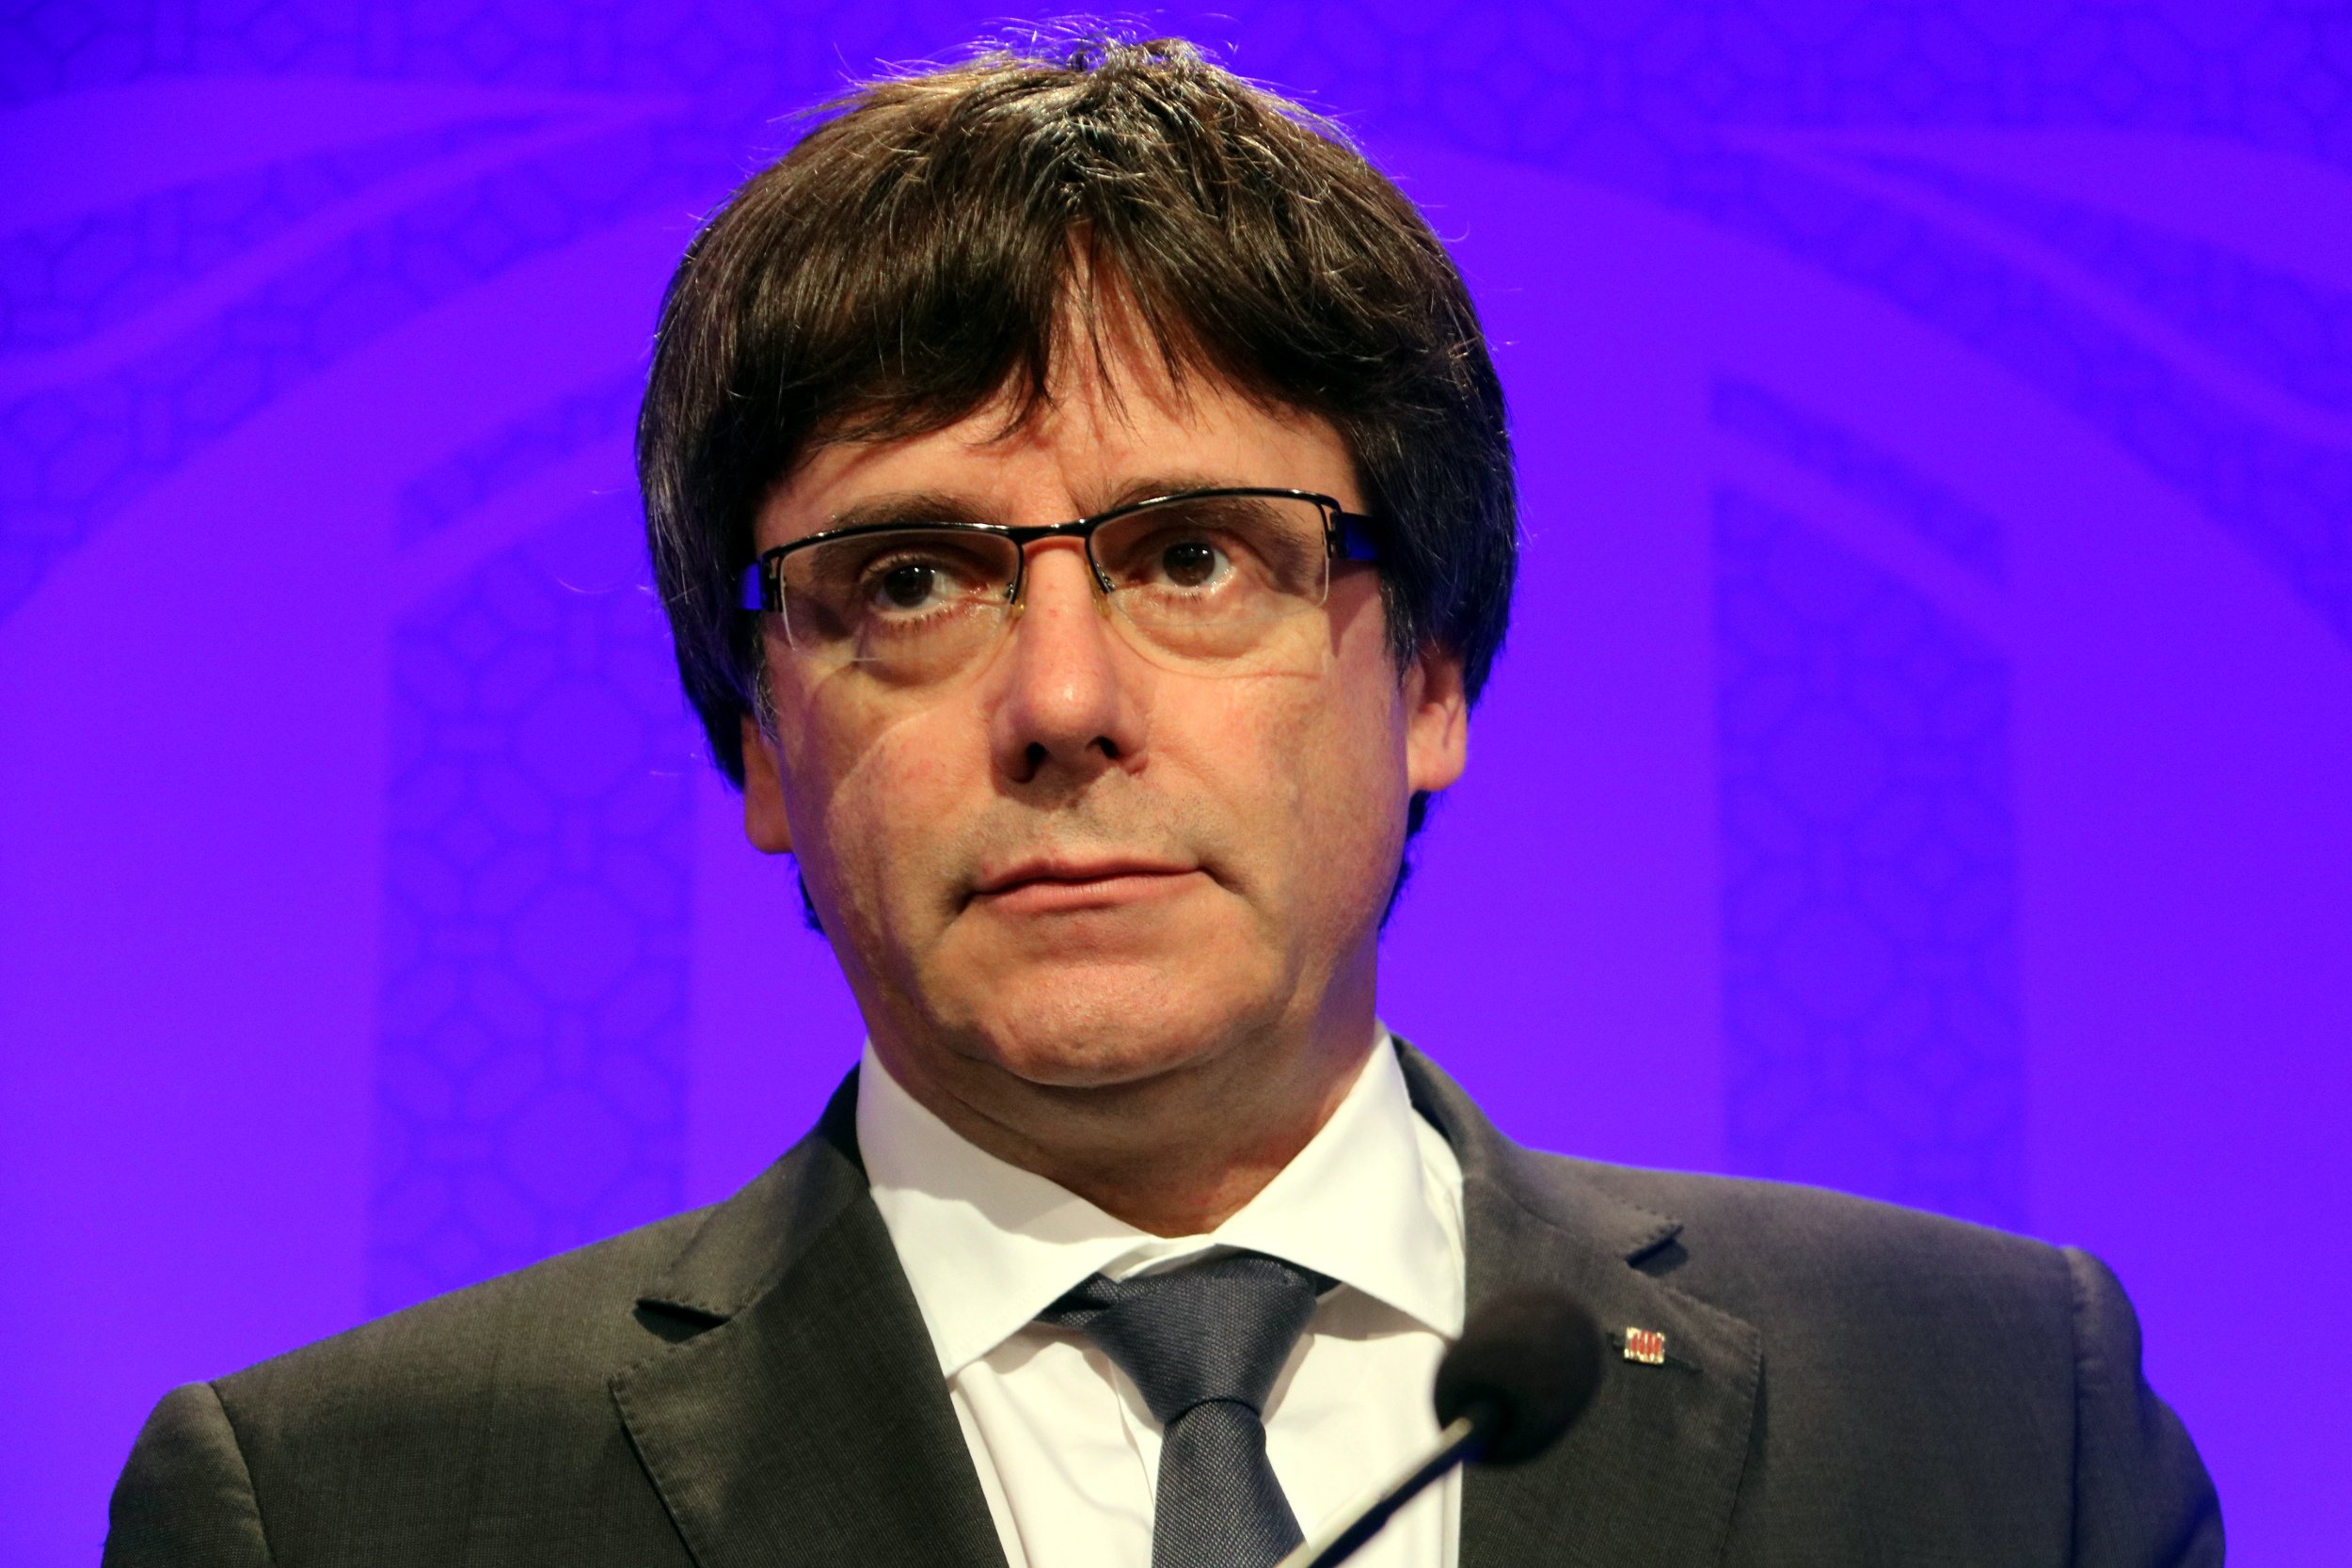 Puigdemont: "Millions have voted, and we need to talk about that"